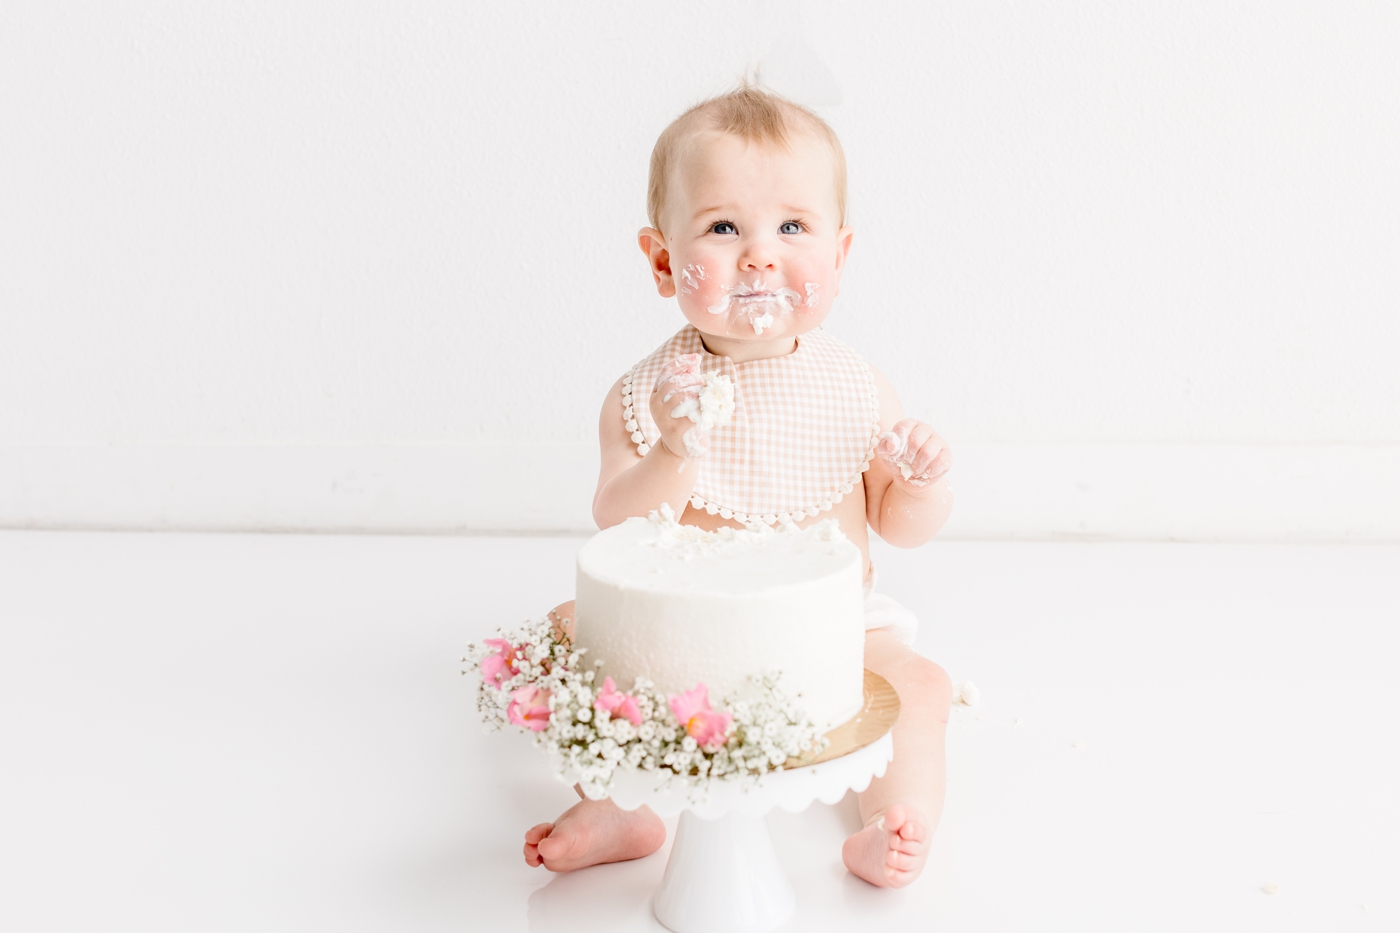 Smiling baby with frosting on cheeks during first birthday photo session with Austin photographer, Sana Ahmed Photography.